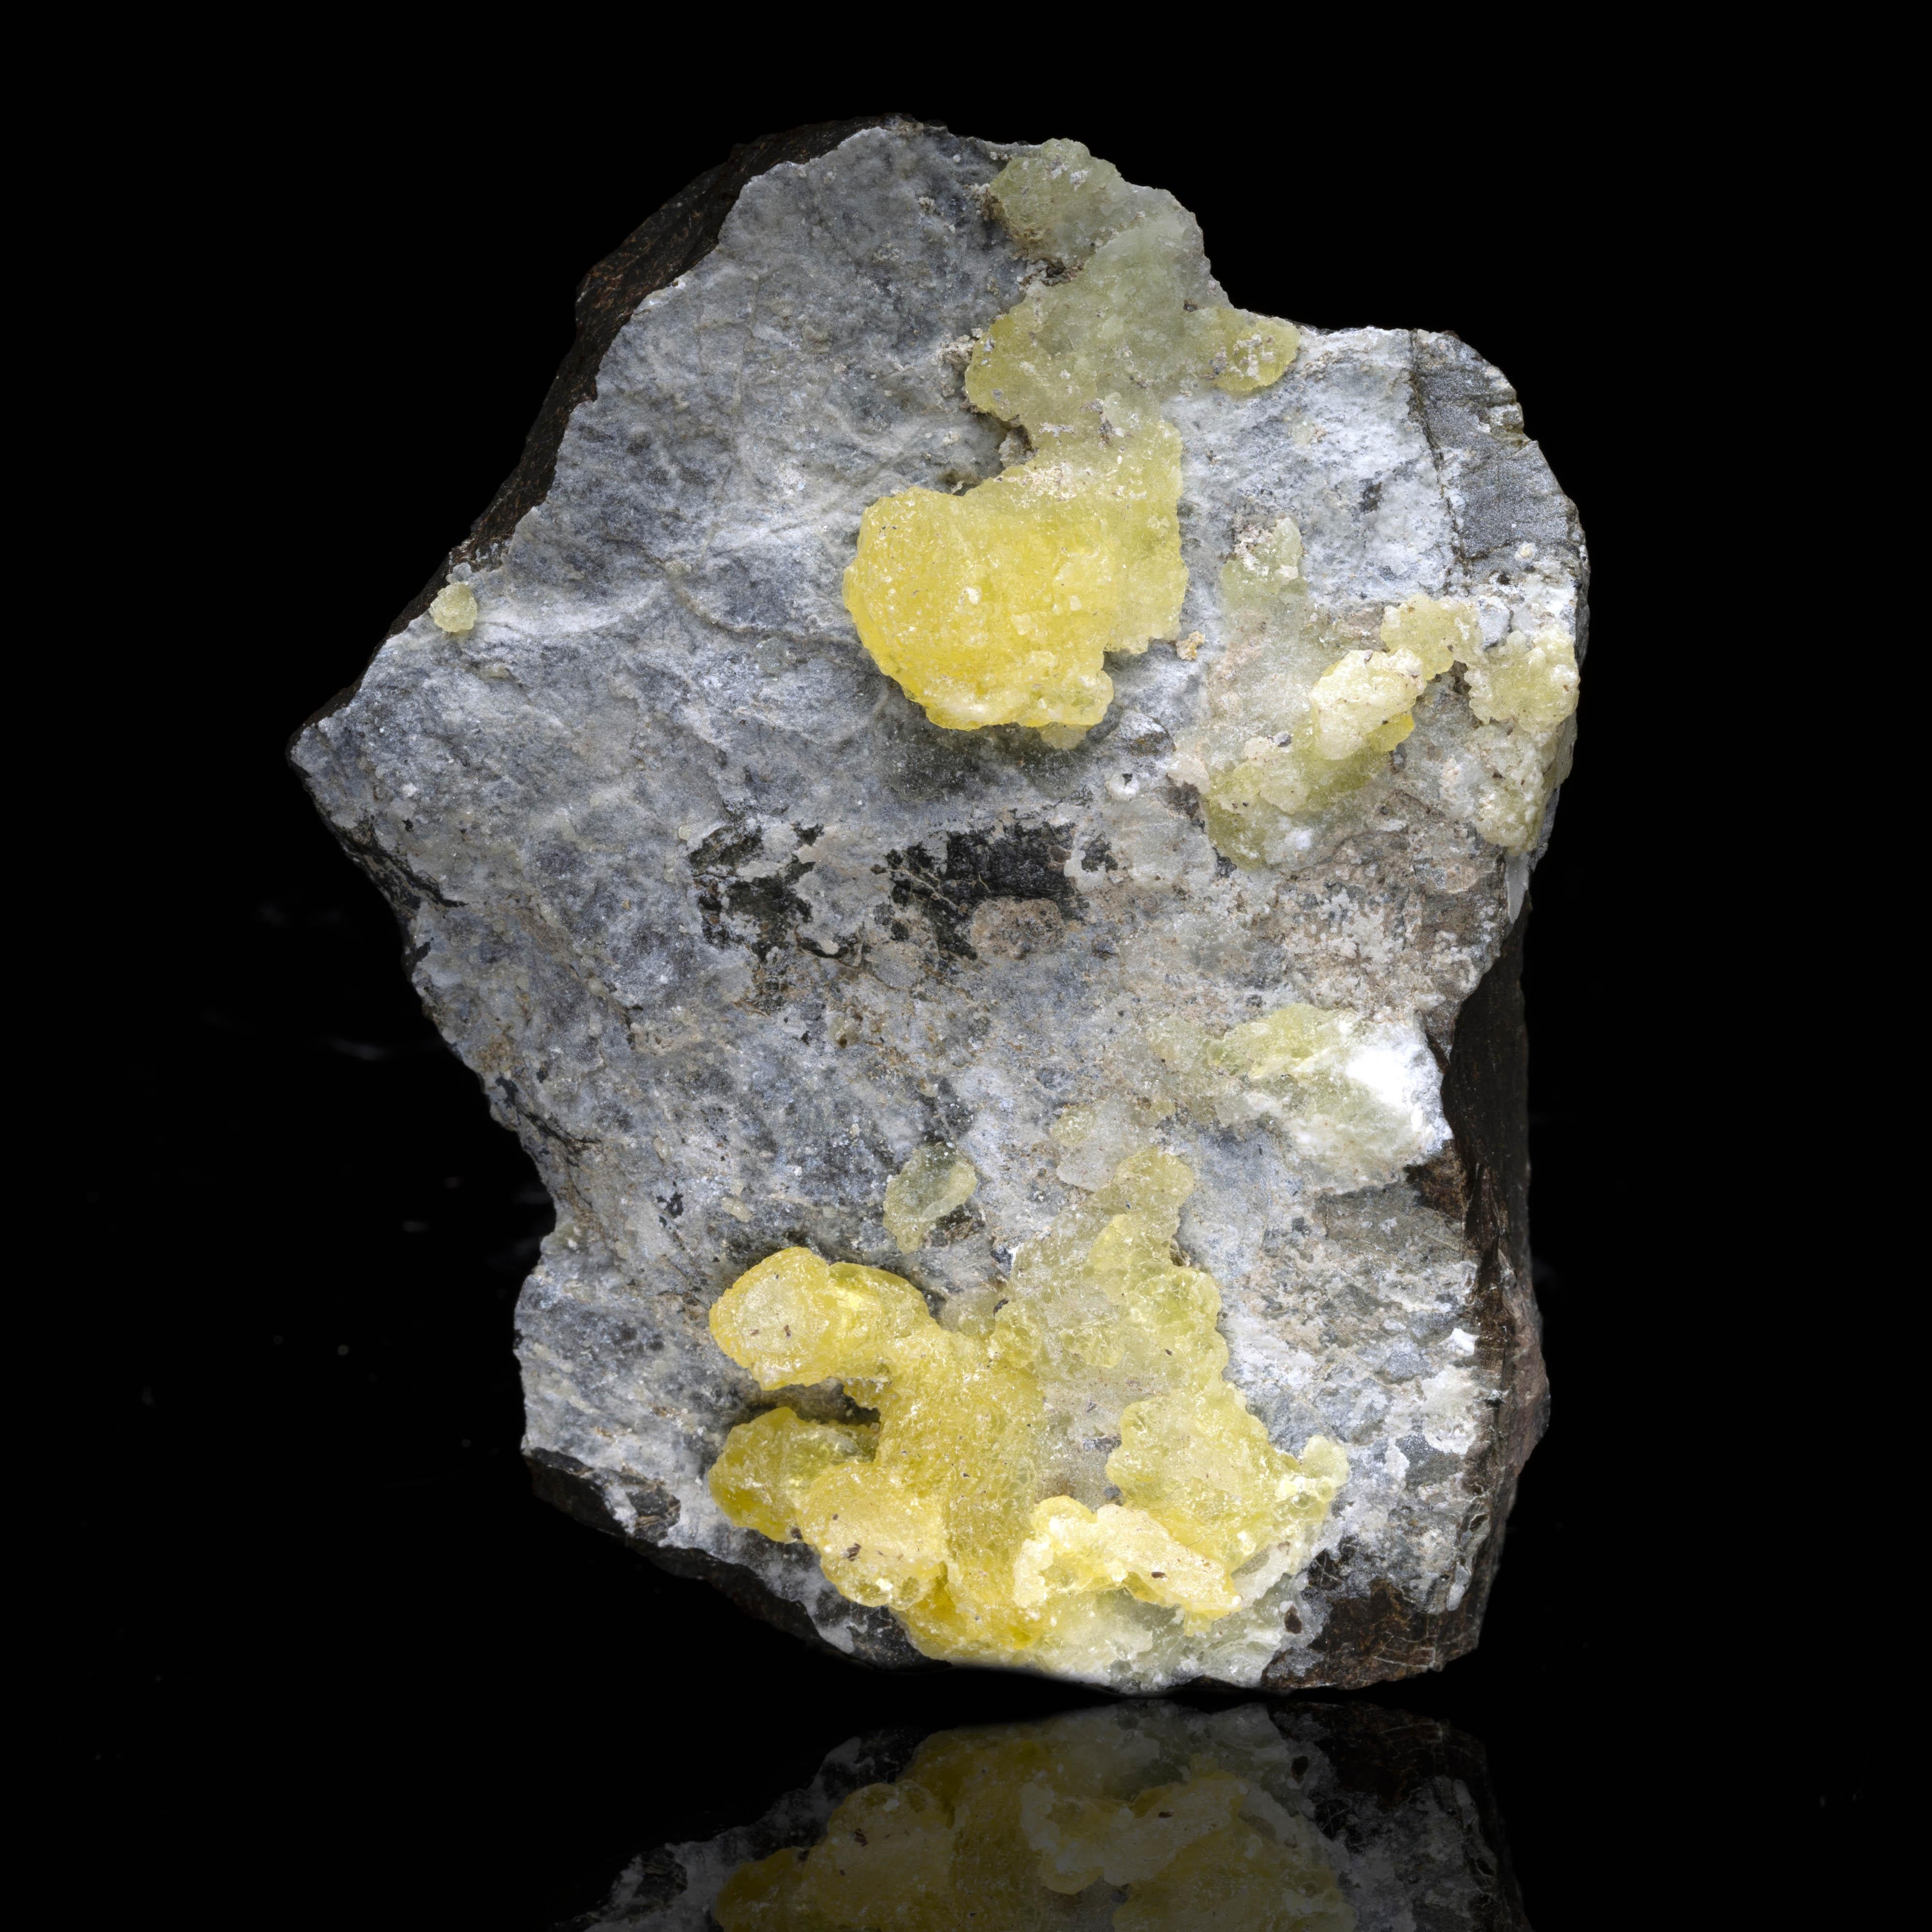 This crayon-colored specimen of yellow brucite crystals on a substantial matrix displays a waxy luster. This cheery and unique piece will brighten up any fine minerals collection.

Dimensions: 3-1/8”W x 3”D x 4-1/2”H, Weight: 1.09 lb.